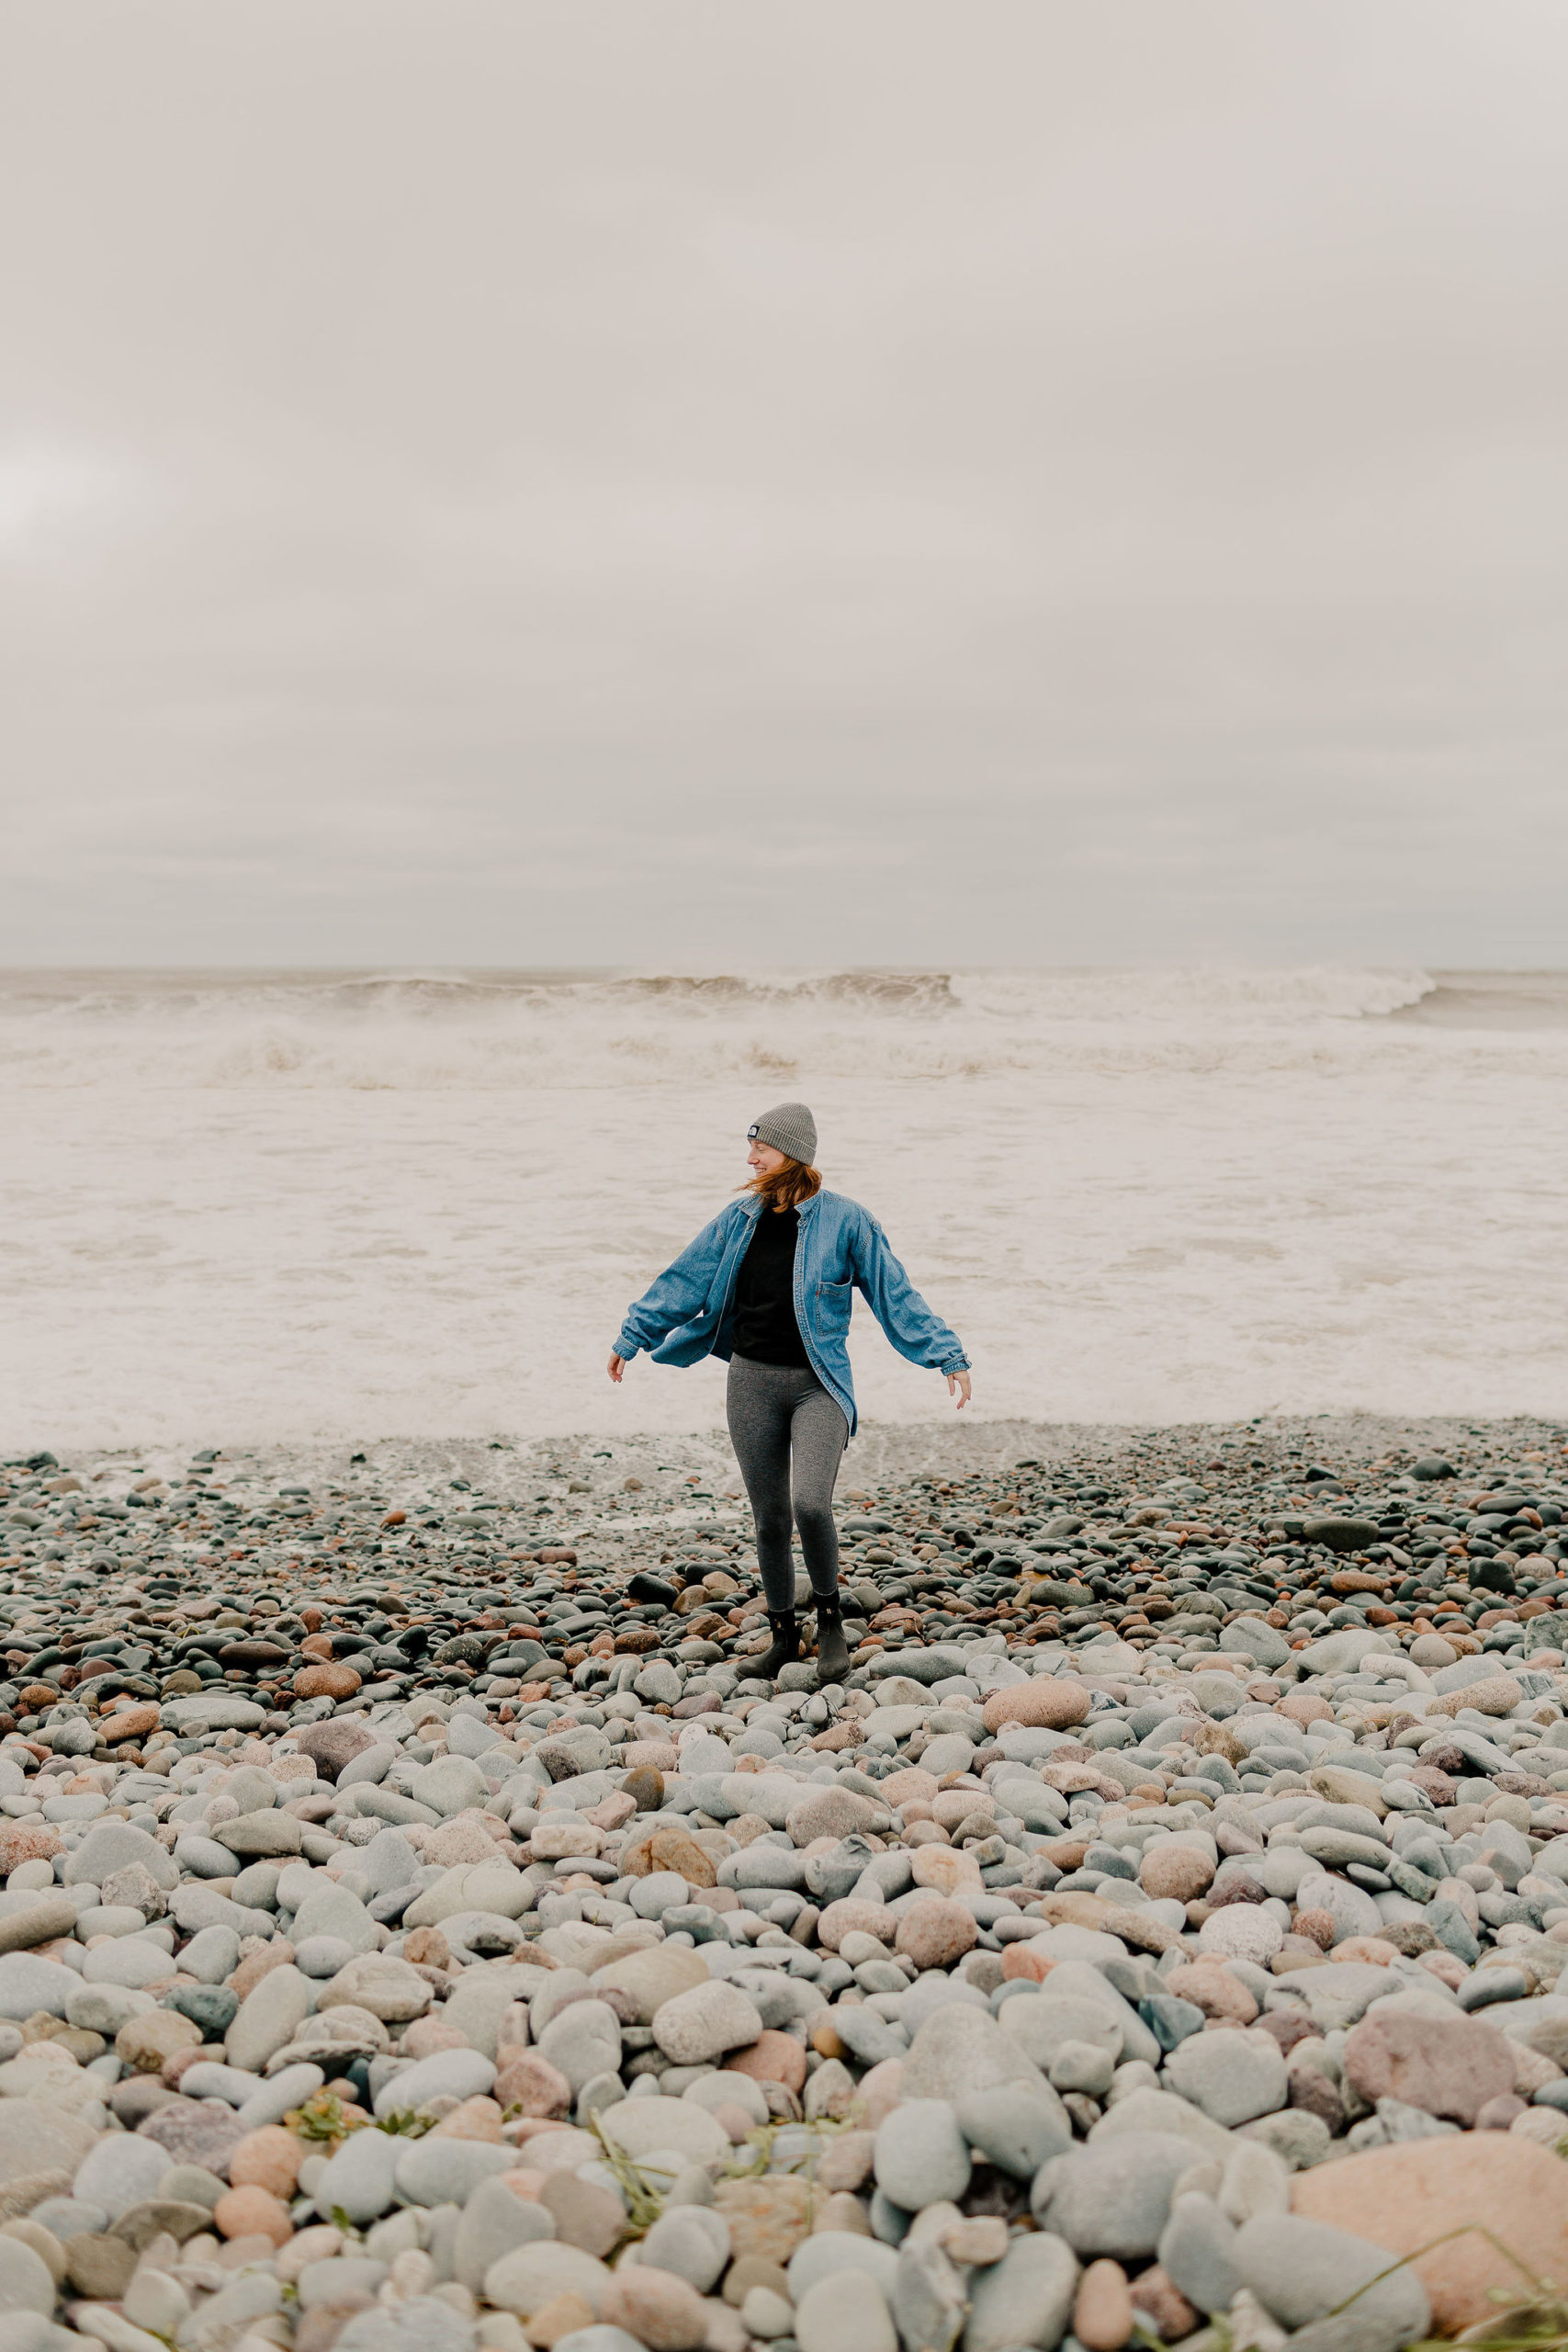 A woman spins on a rocky beach on a cloudy day.